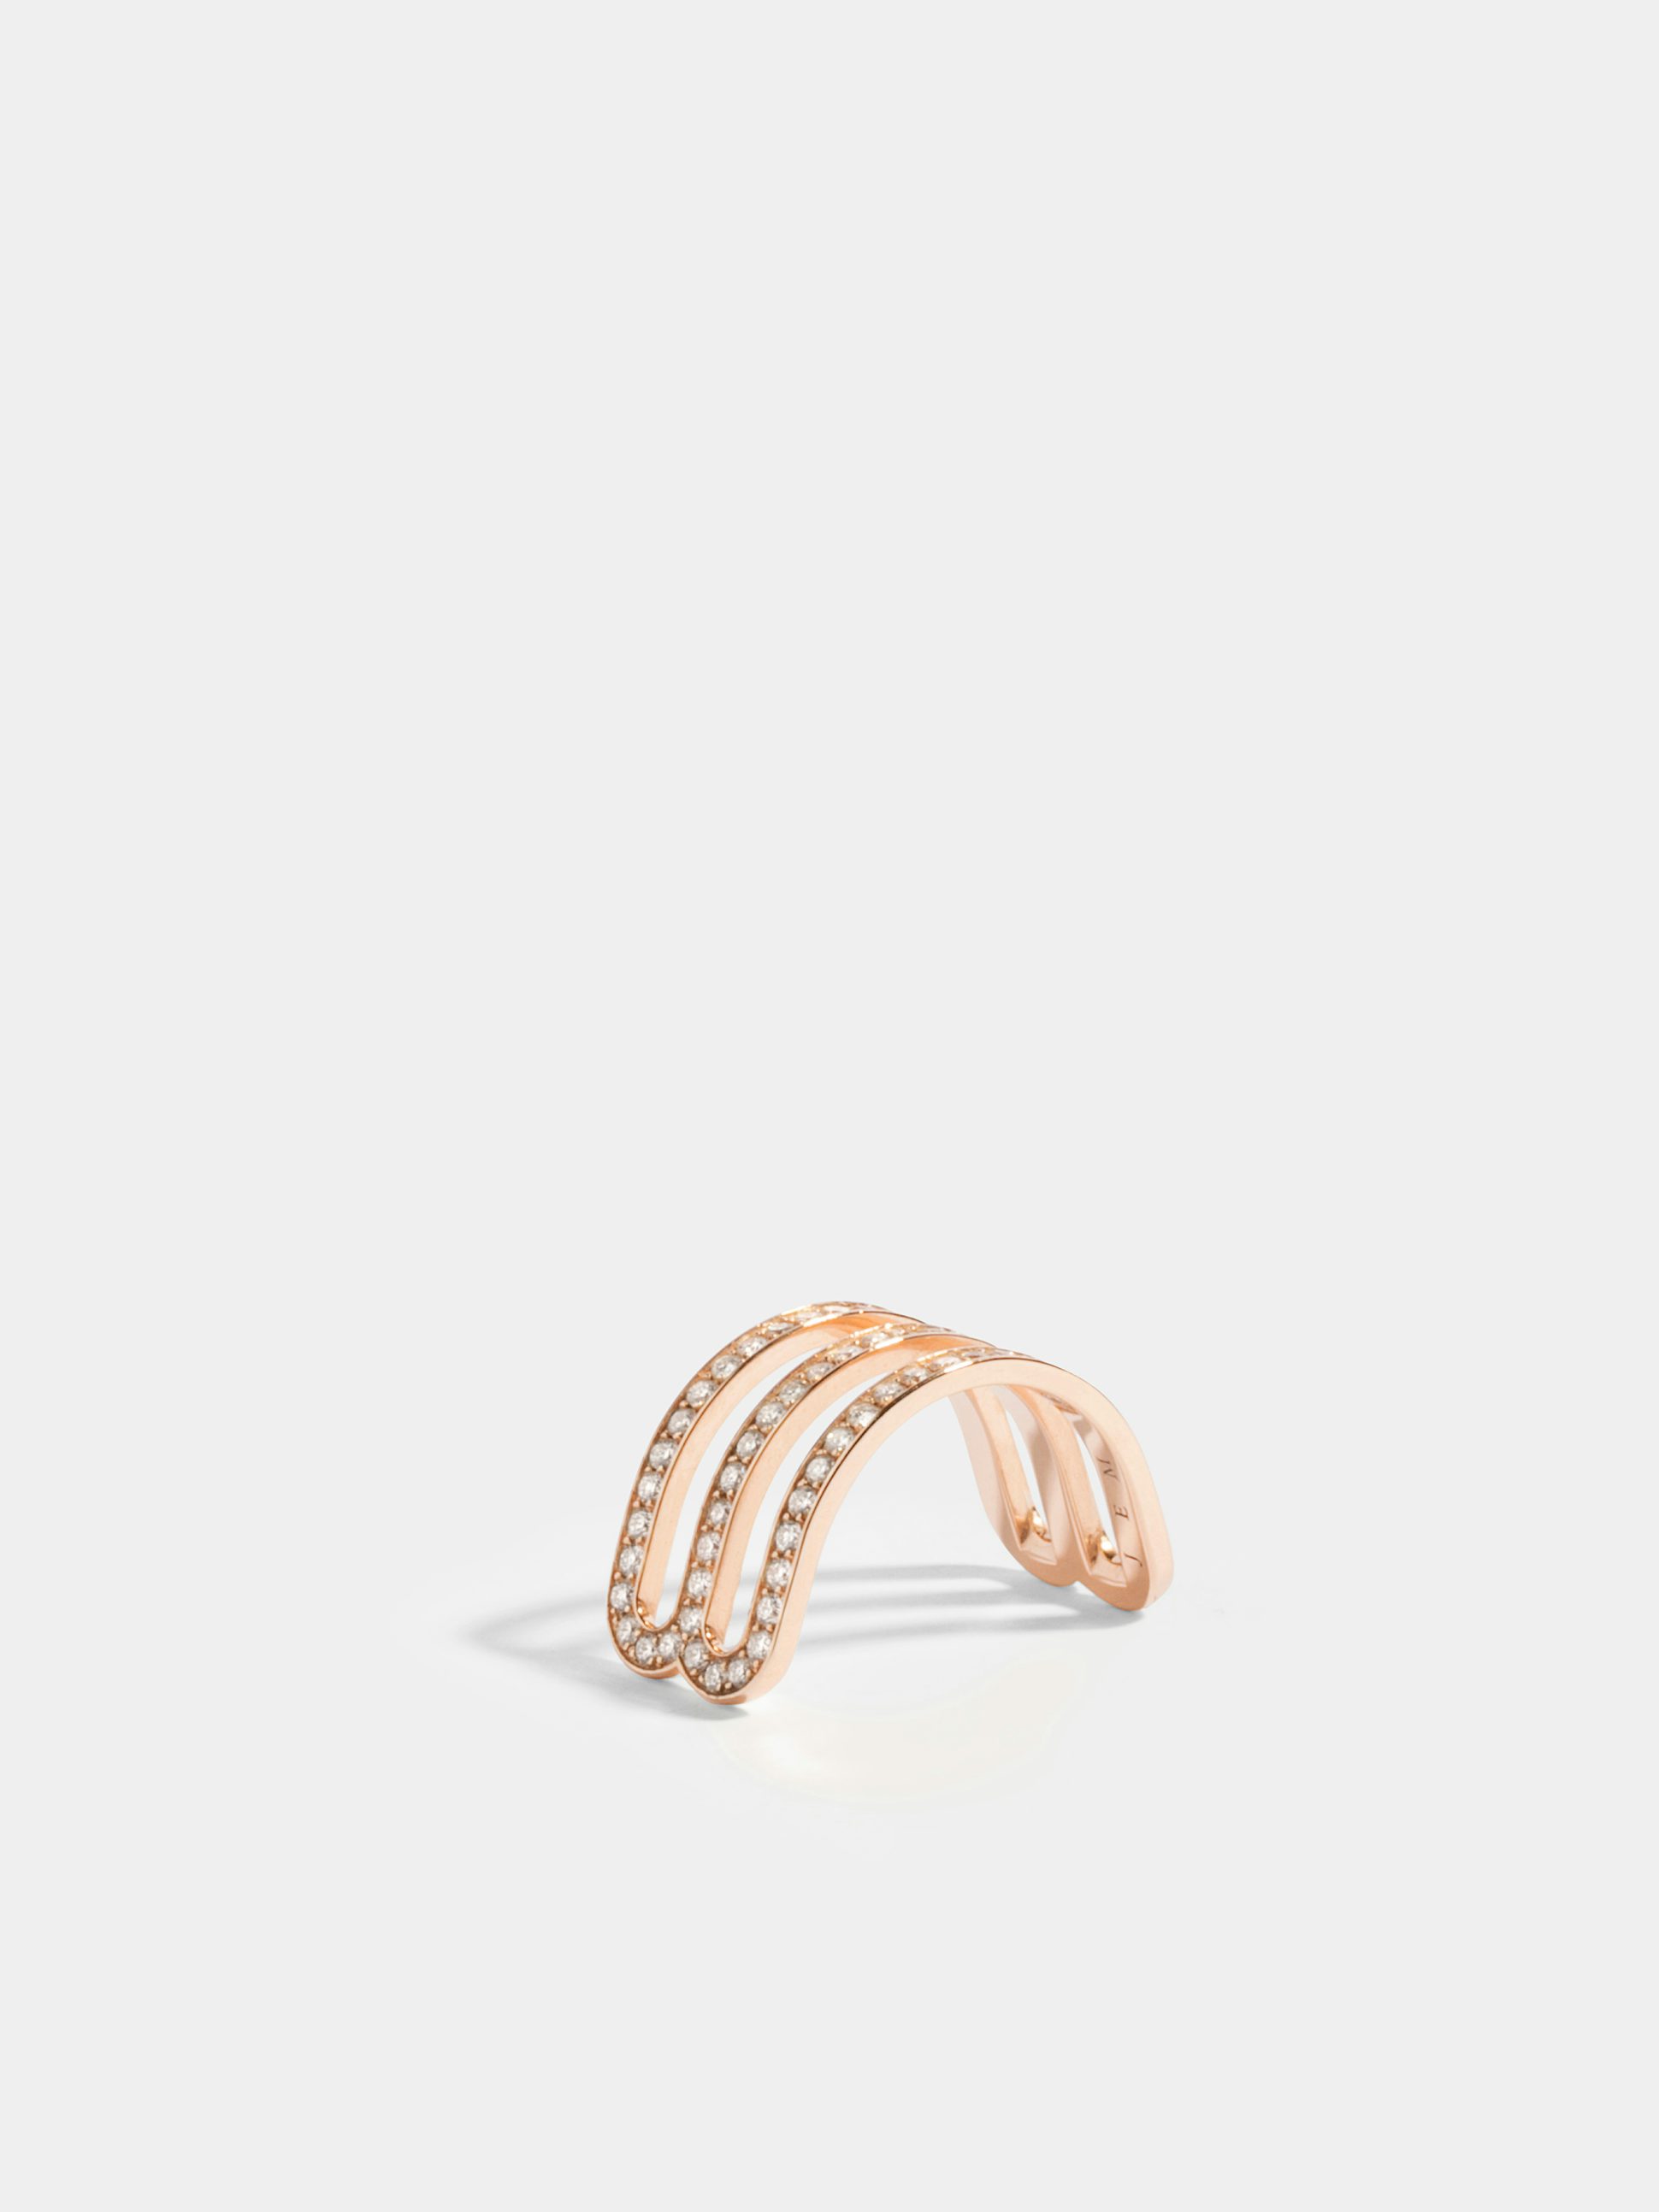 Étreintes double half-ring in 18k Fairmined ethical rose gold, paved with lab-grown diamonds.